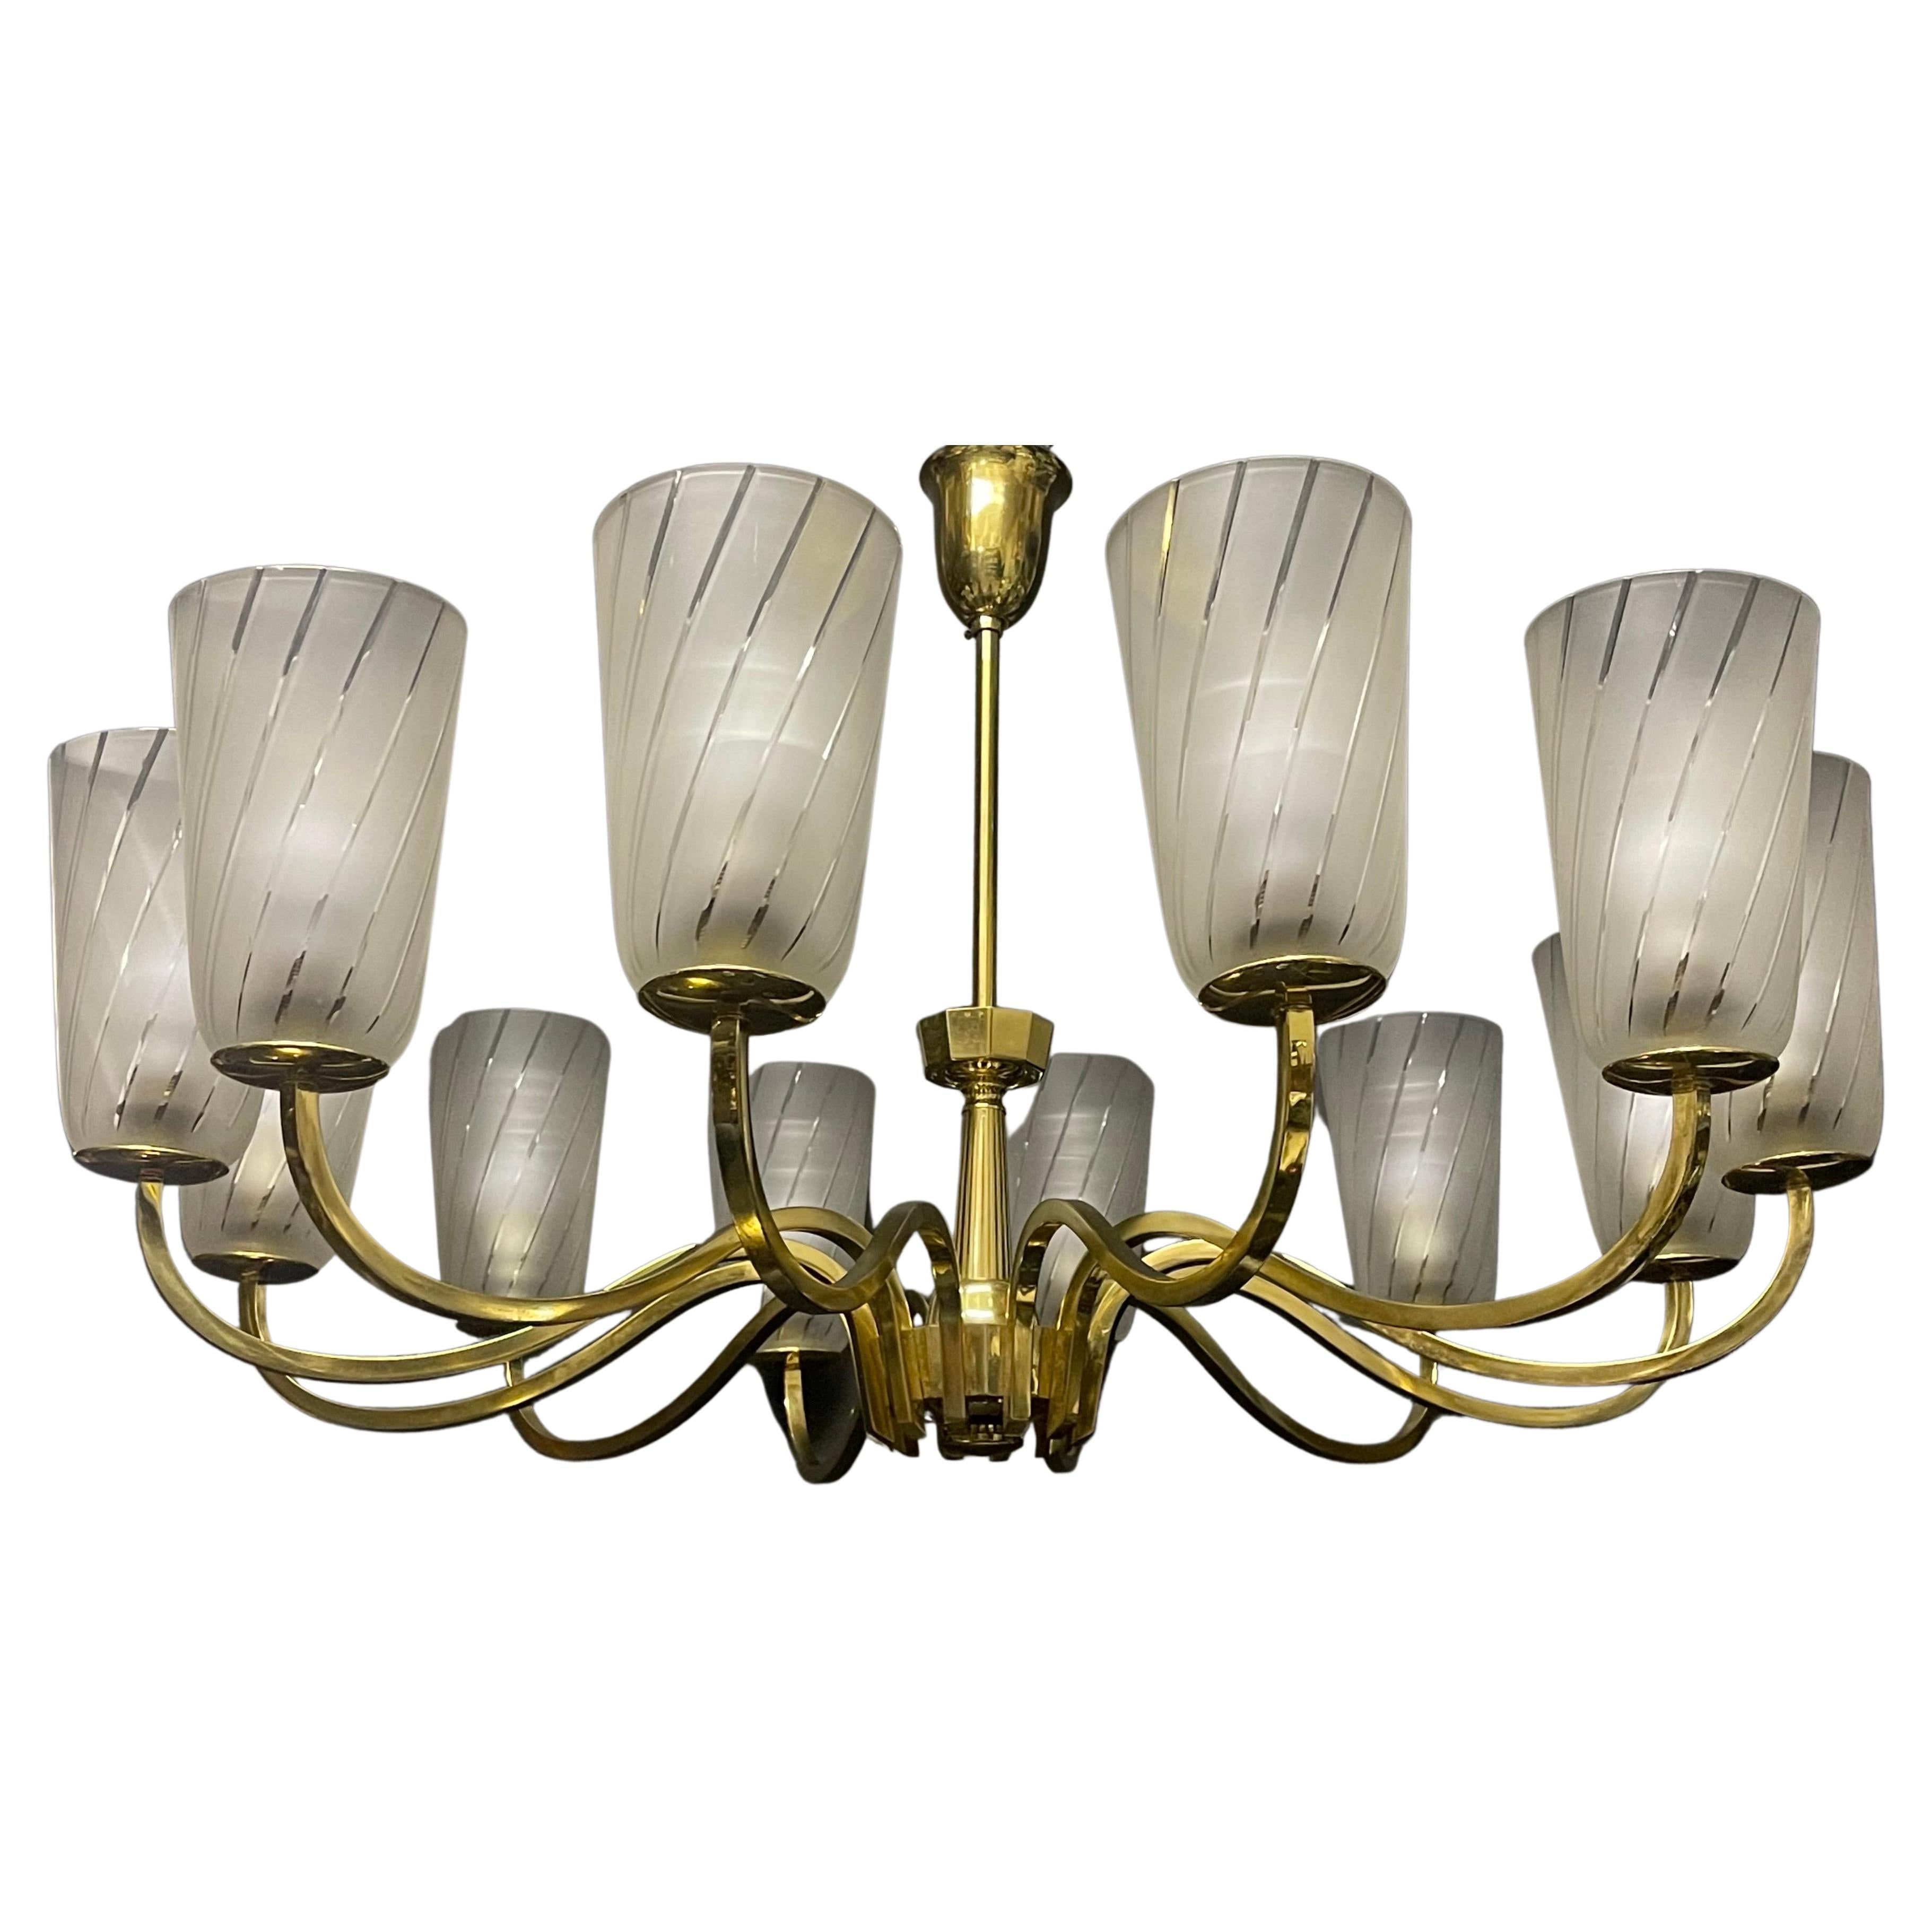 A huge Art Deco German polished brass and striped frosted glass chandelier, 1930s.
Socket: 12 x e27 or E26 (also for US standards).
The condition is excellent.